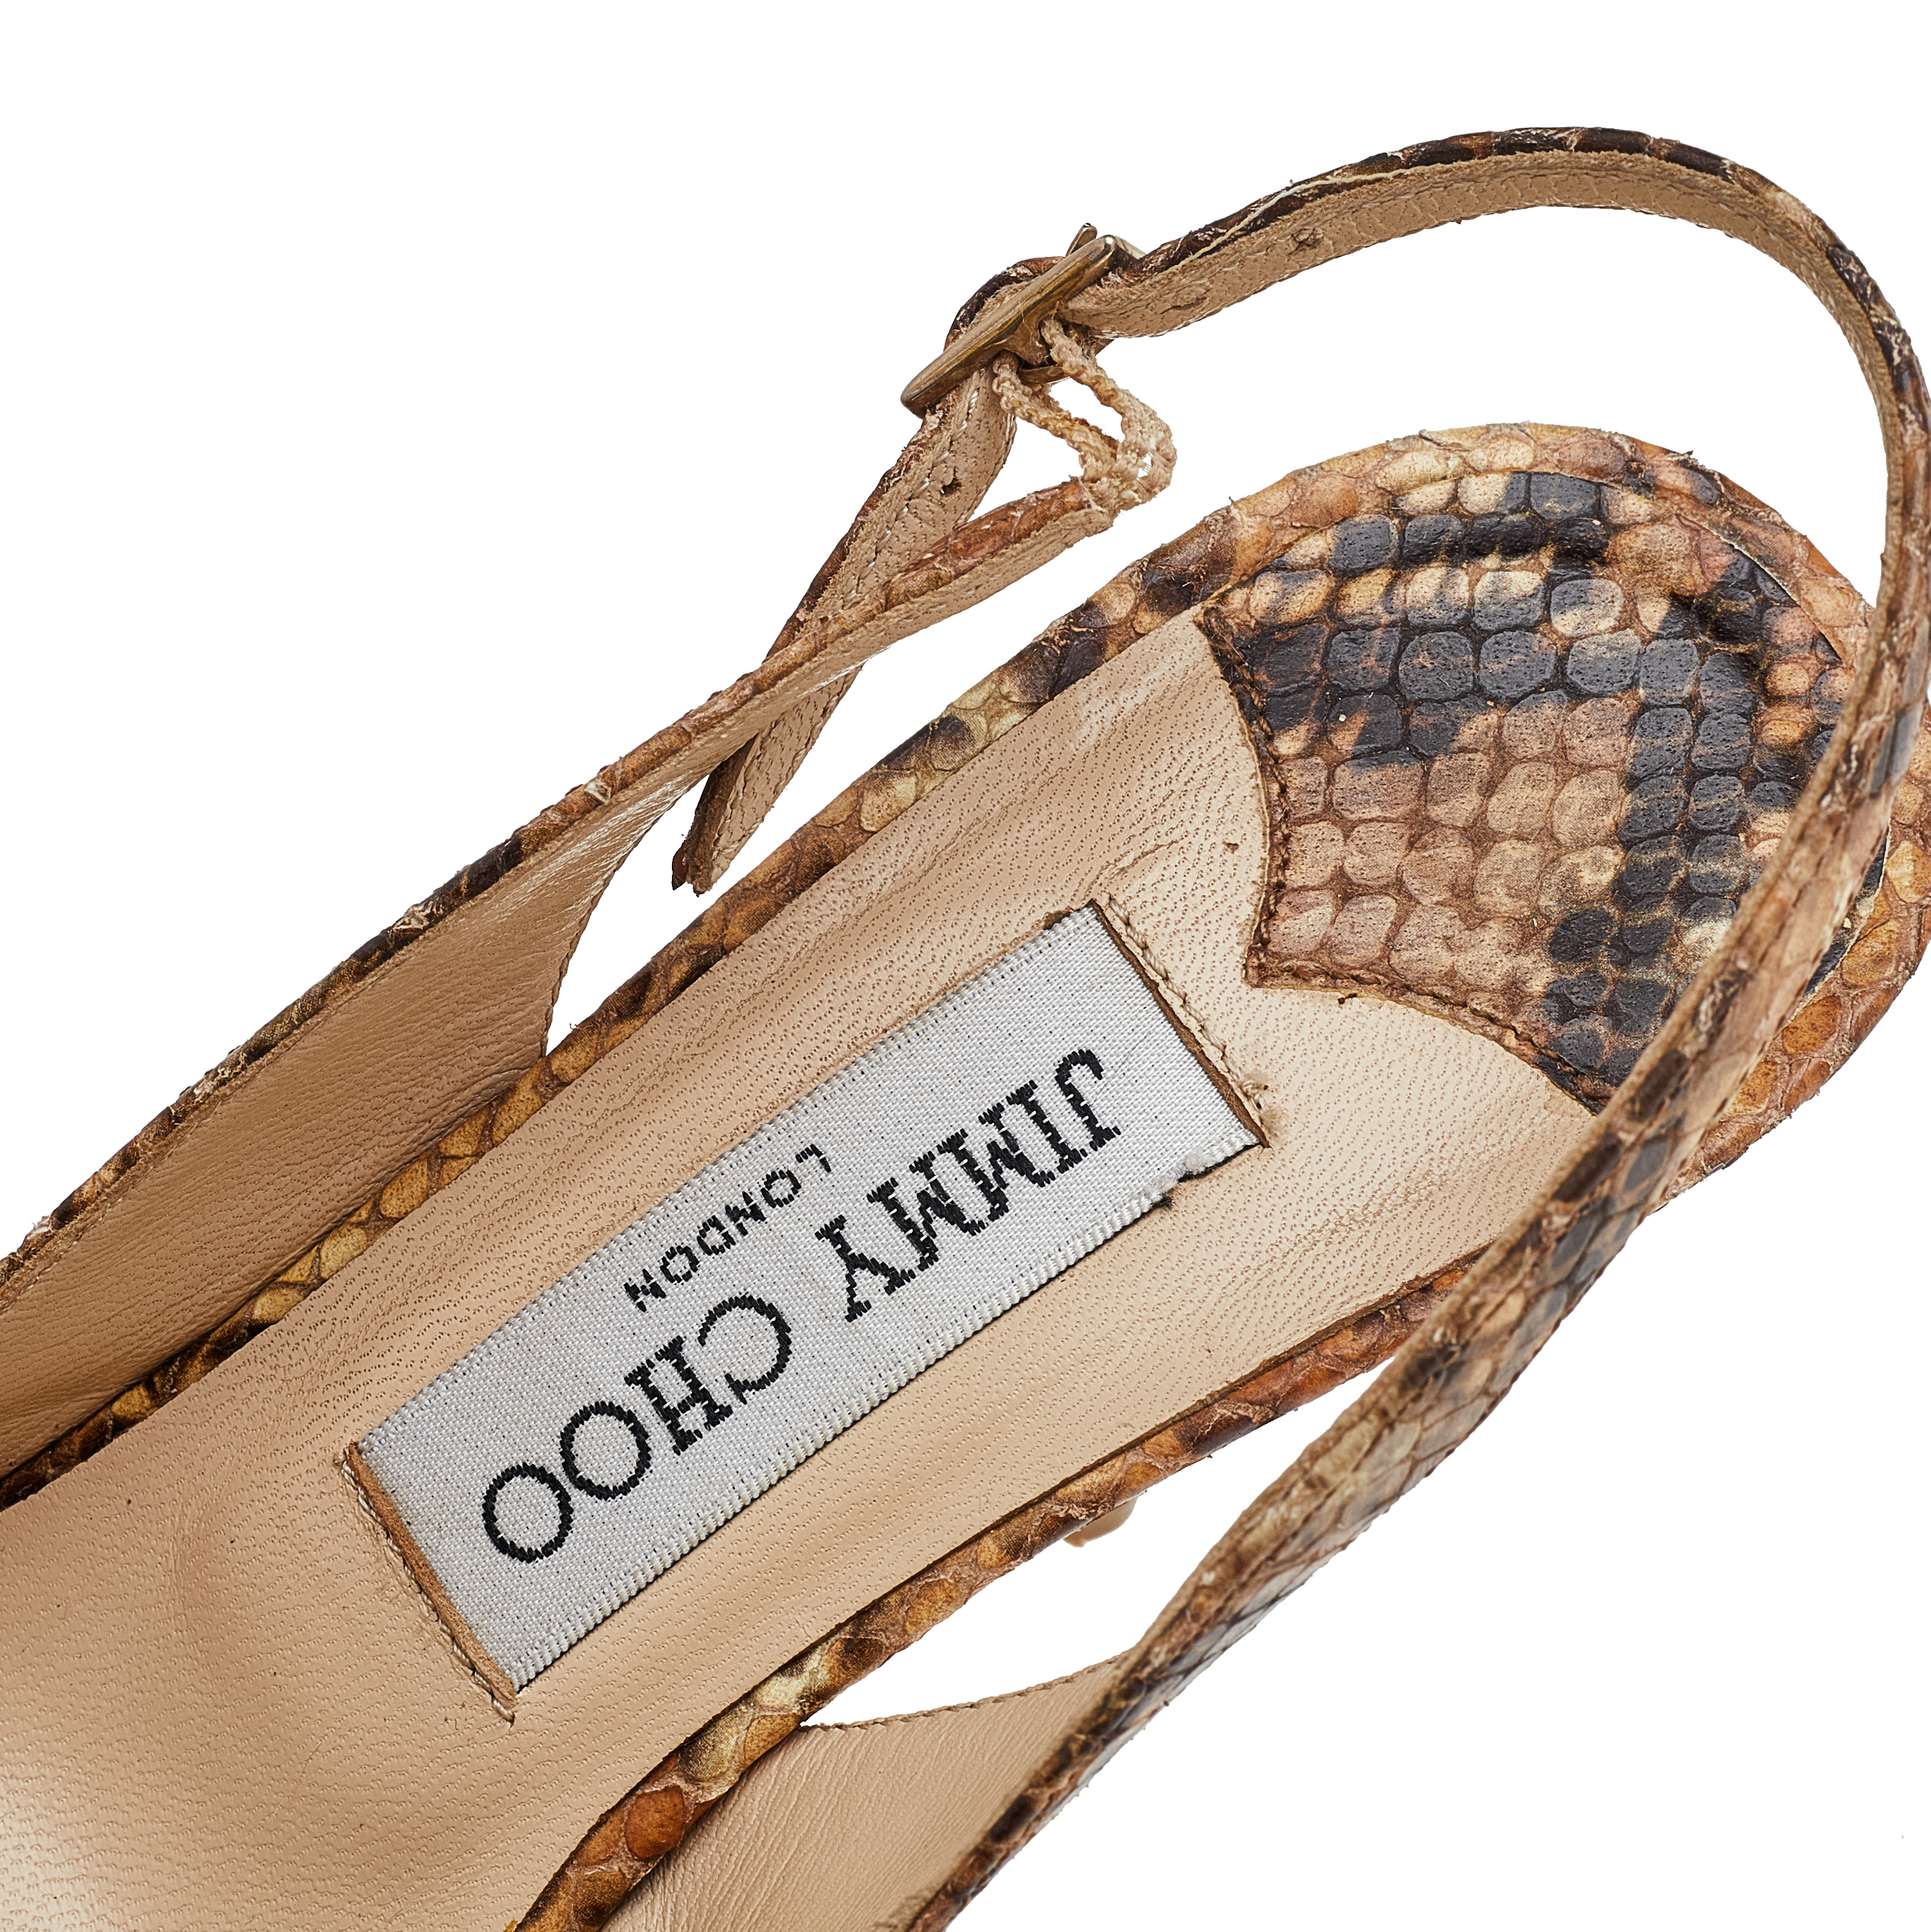 Jimmy Choo Multicolor Python Embossed Leather Slingback Sandals Size 35.5